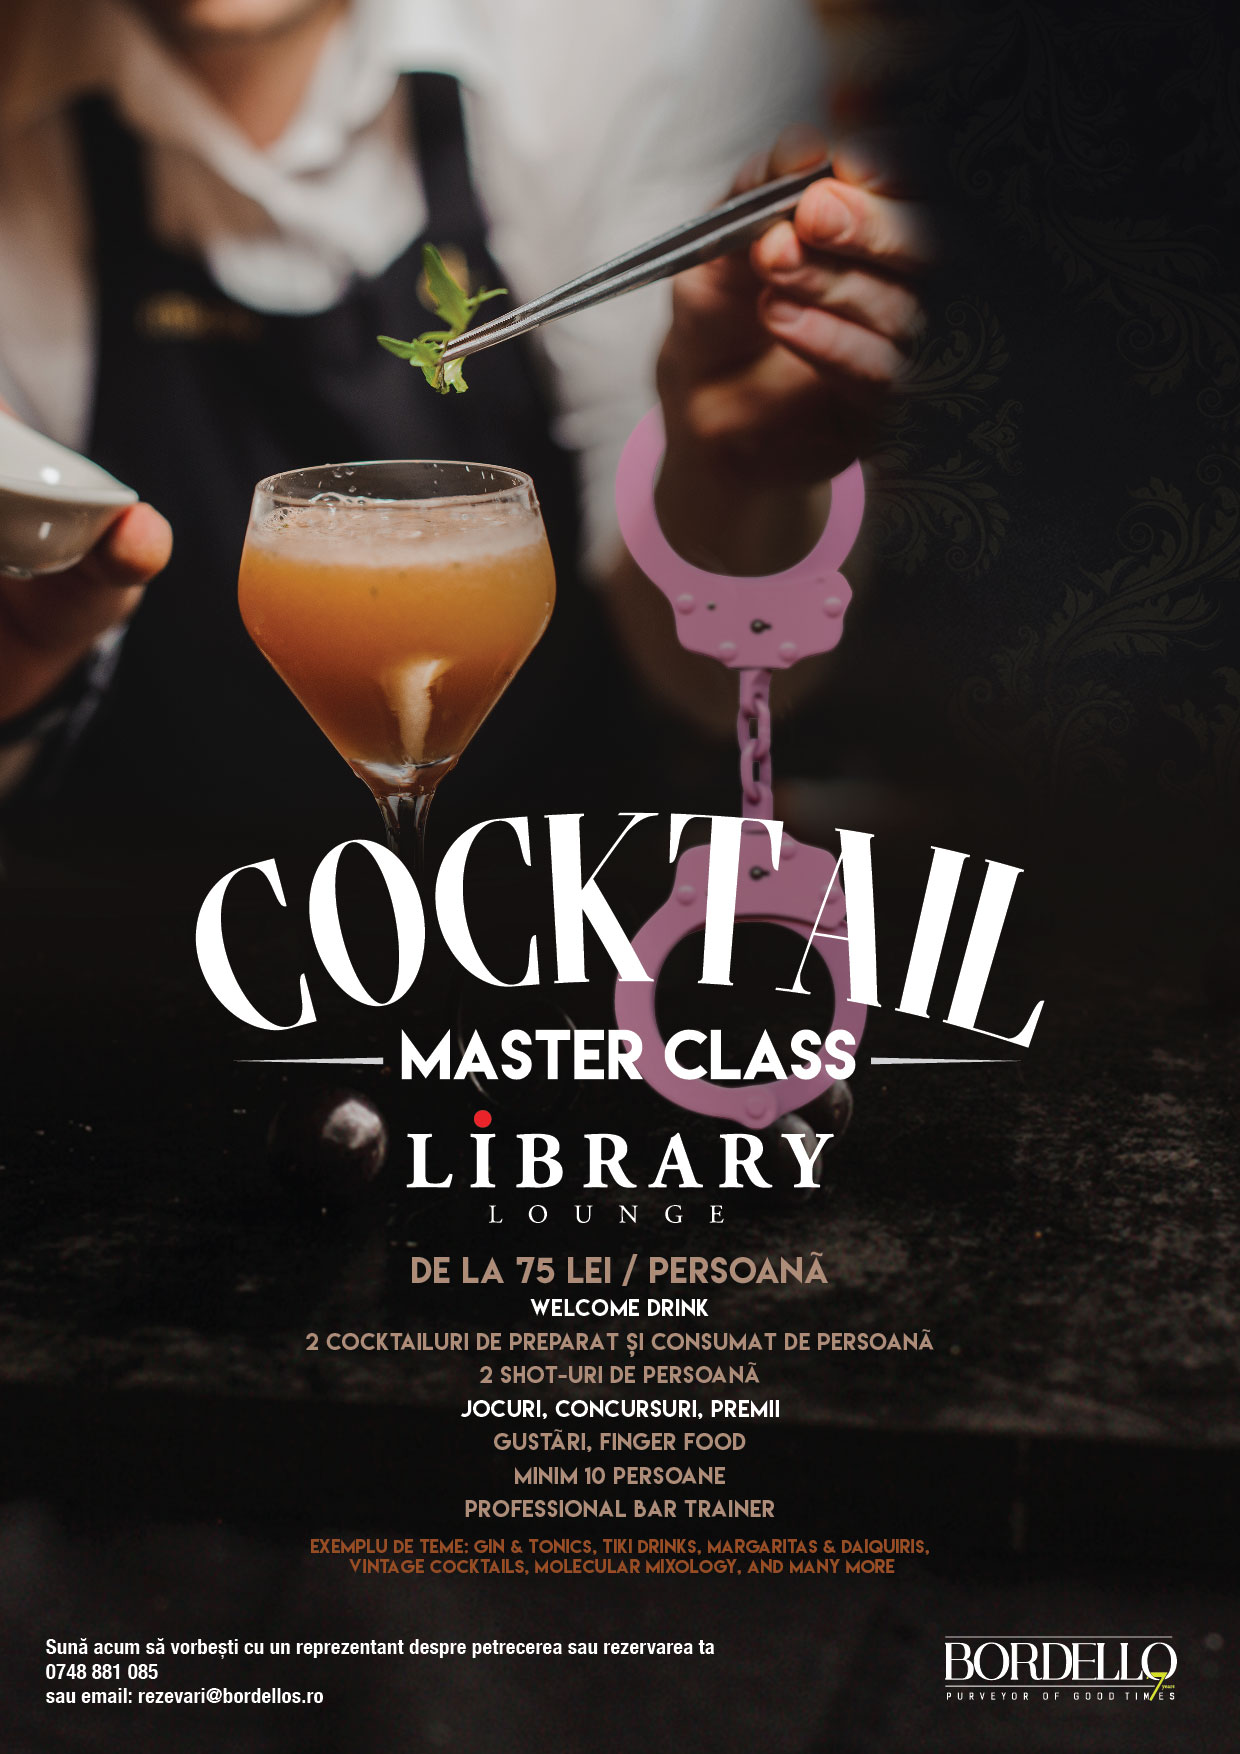 Cocktail Master Class